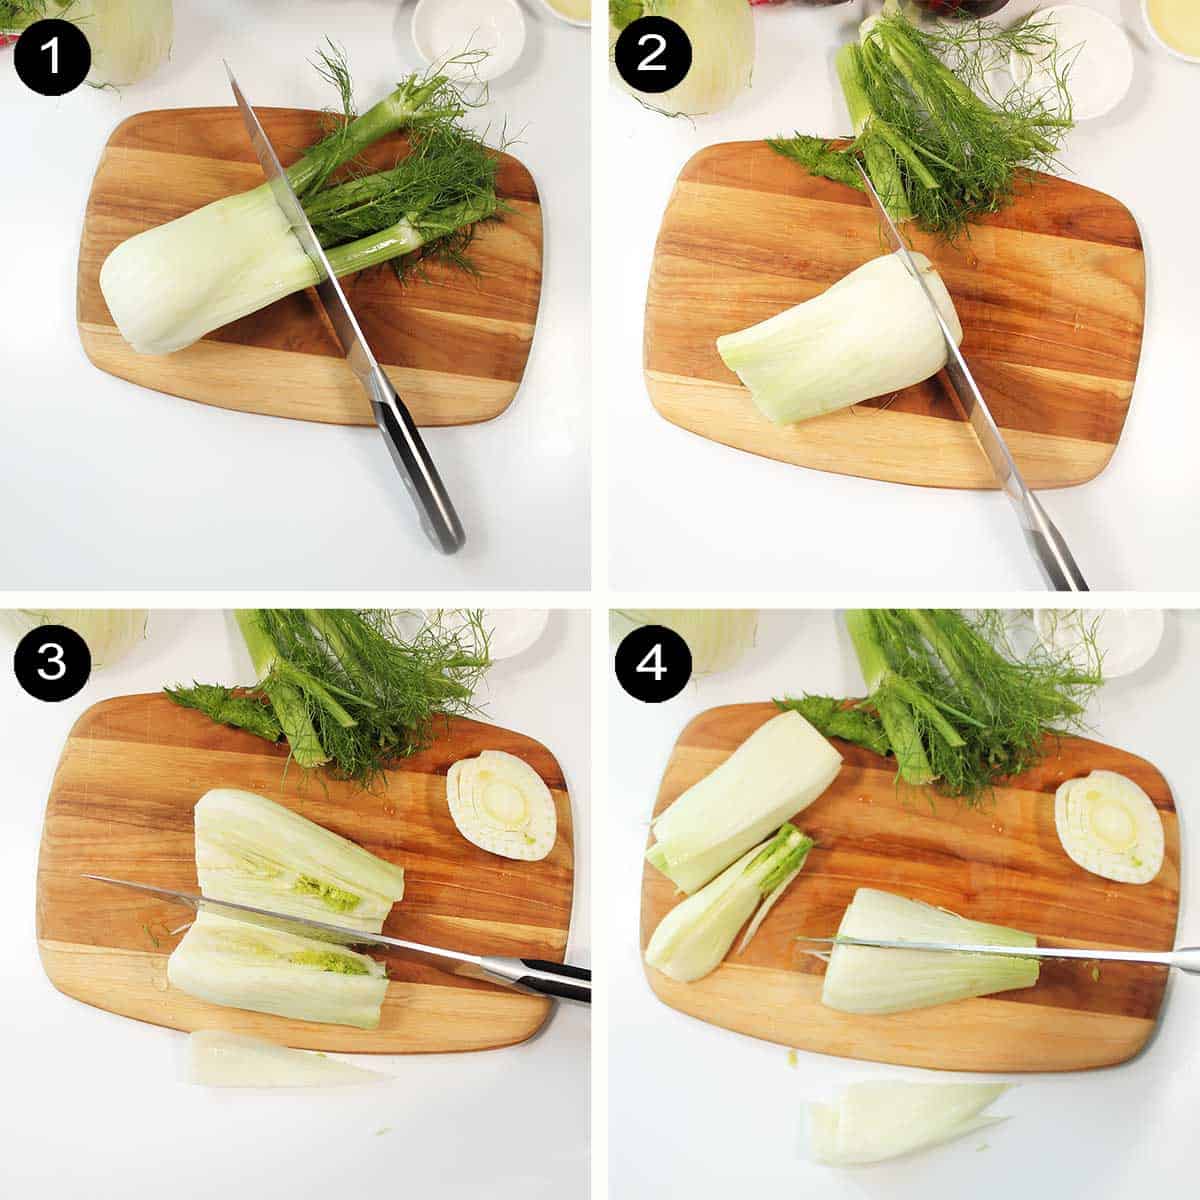 How to cut fennel.